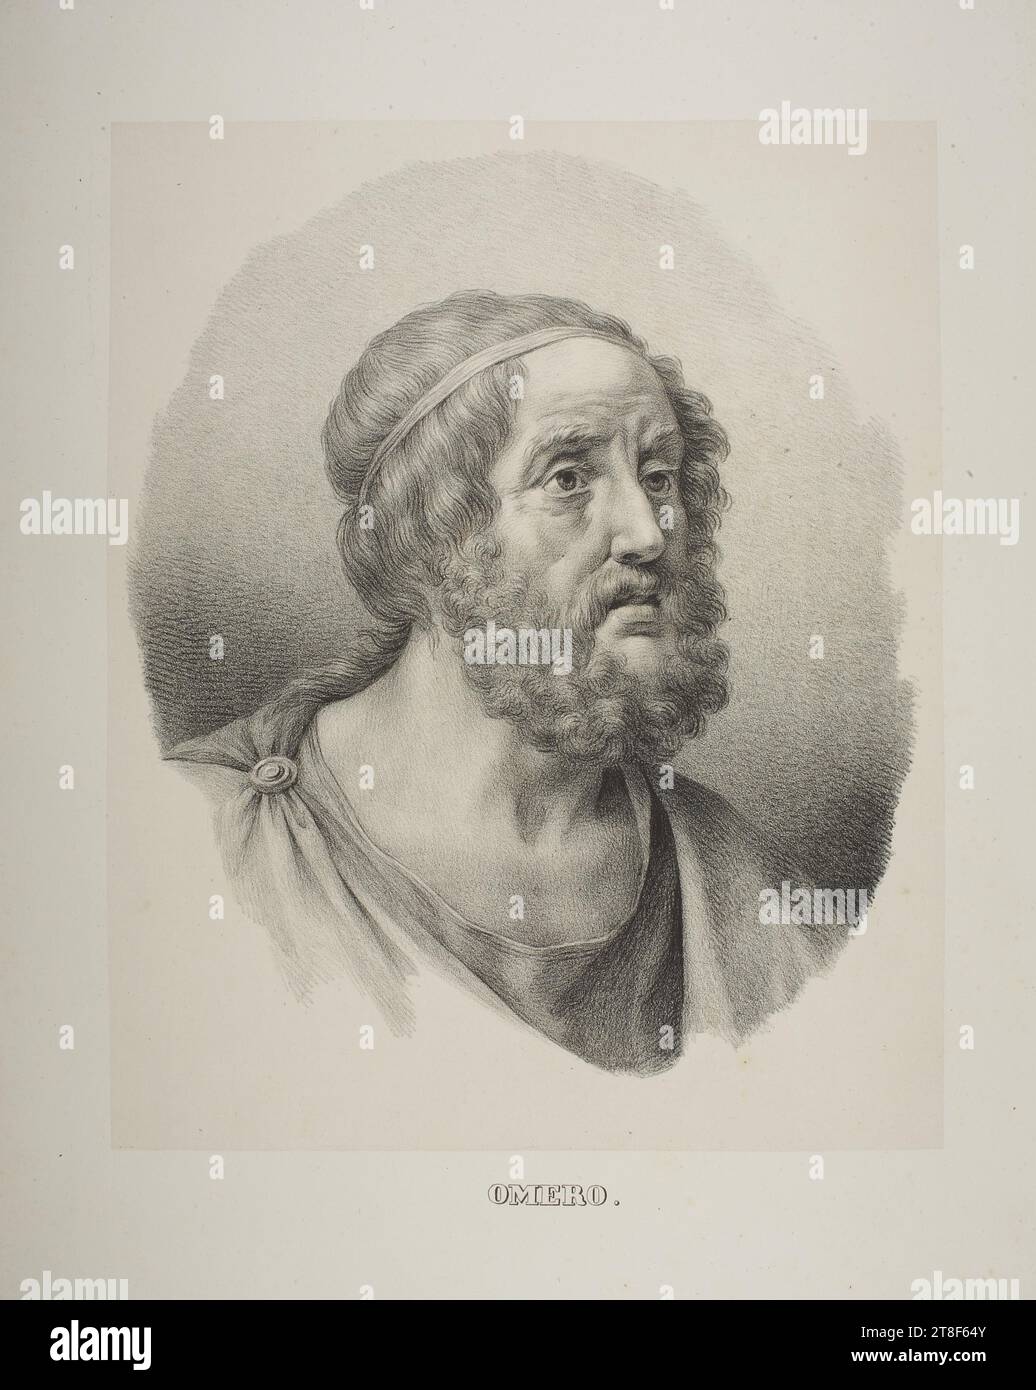 Homer, Friedrich Rehberg, 1758-1835, No later than 1835, Graphic Art, Lithograph, Paper, Color, Printer's ink, Lithography, Printet, Height (sight size) 355 mm, Height (plate size) 318 mm, Height (passepartout) 650 mm, Height (paper size) 485 mm, Width (plate size) 256 mm, Width (passepartout) 500 mm, Width (paper size) 347 mm, Width (sight size) 256 mm, OMERO, Graphic Design, European Stock Photo